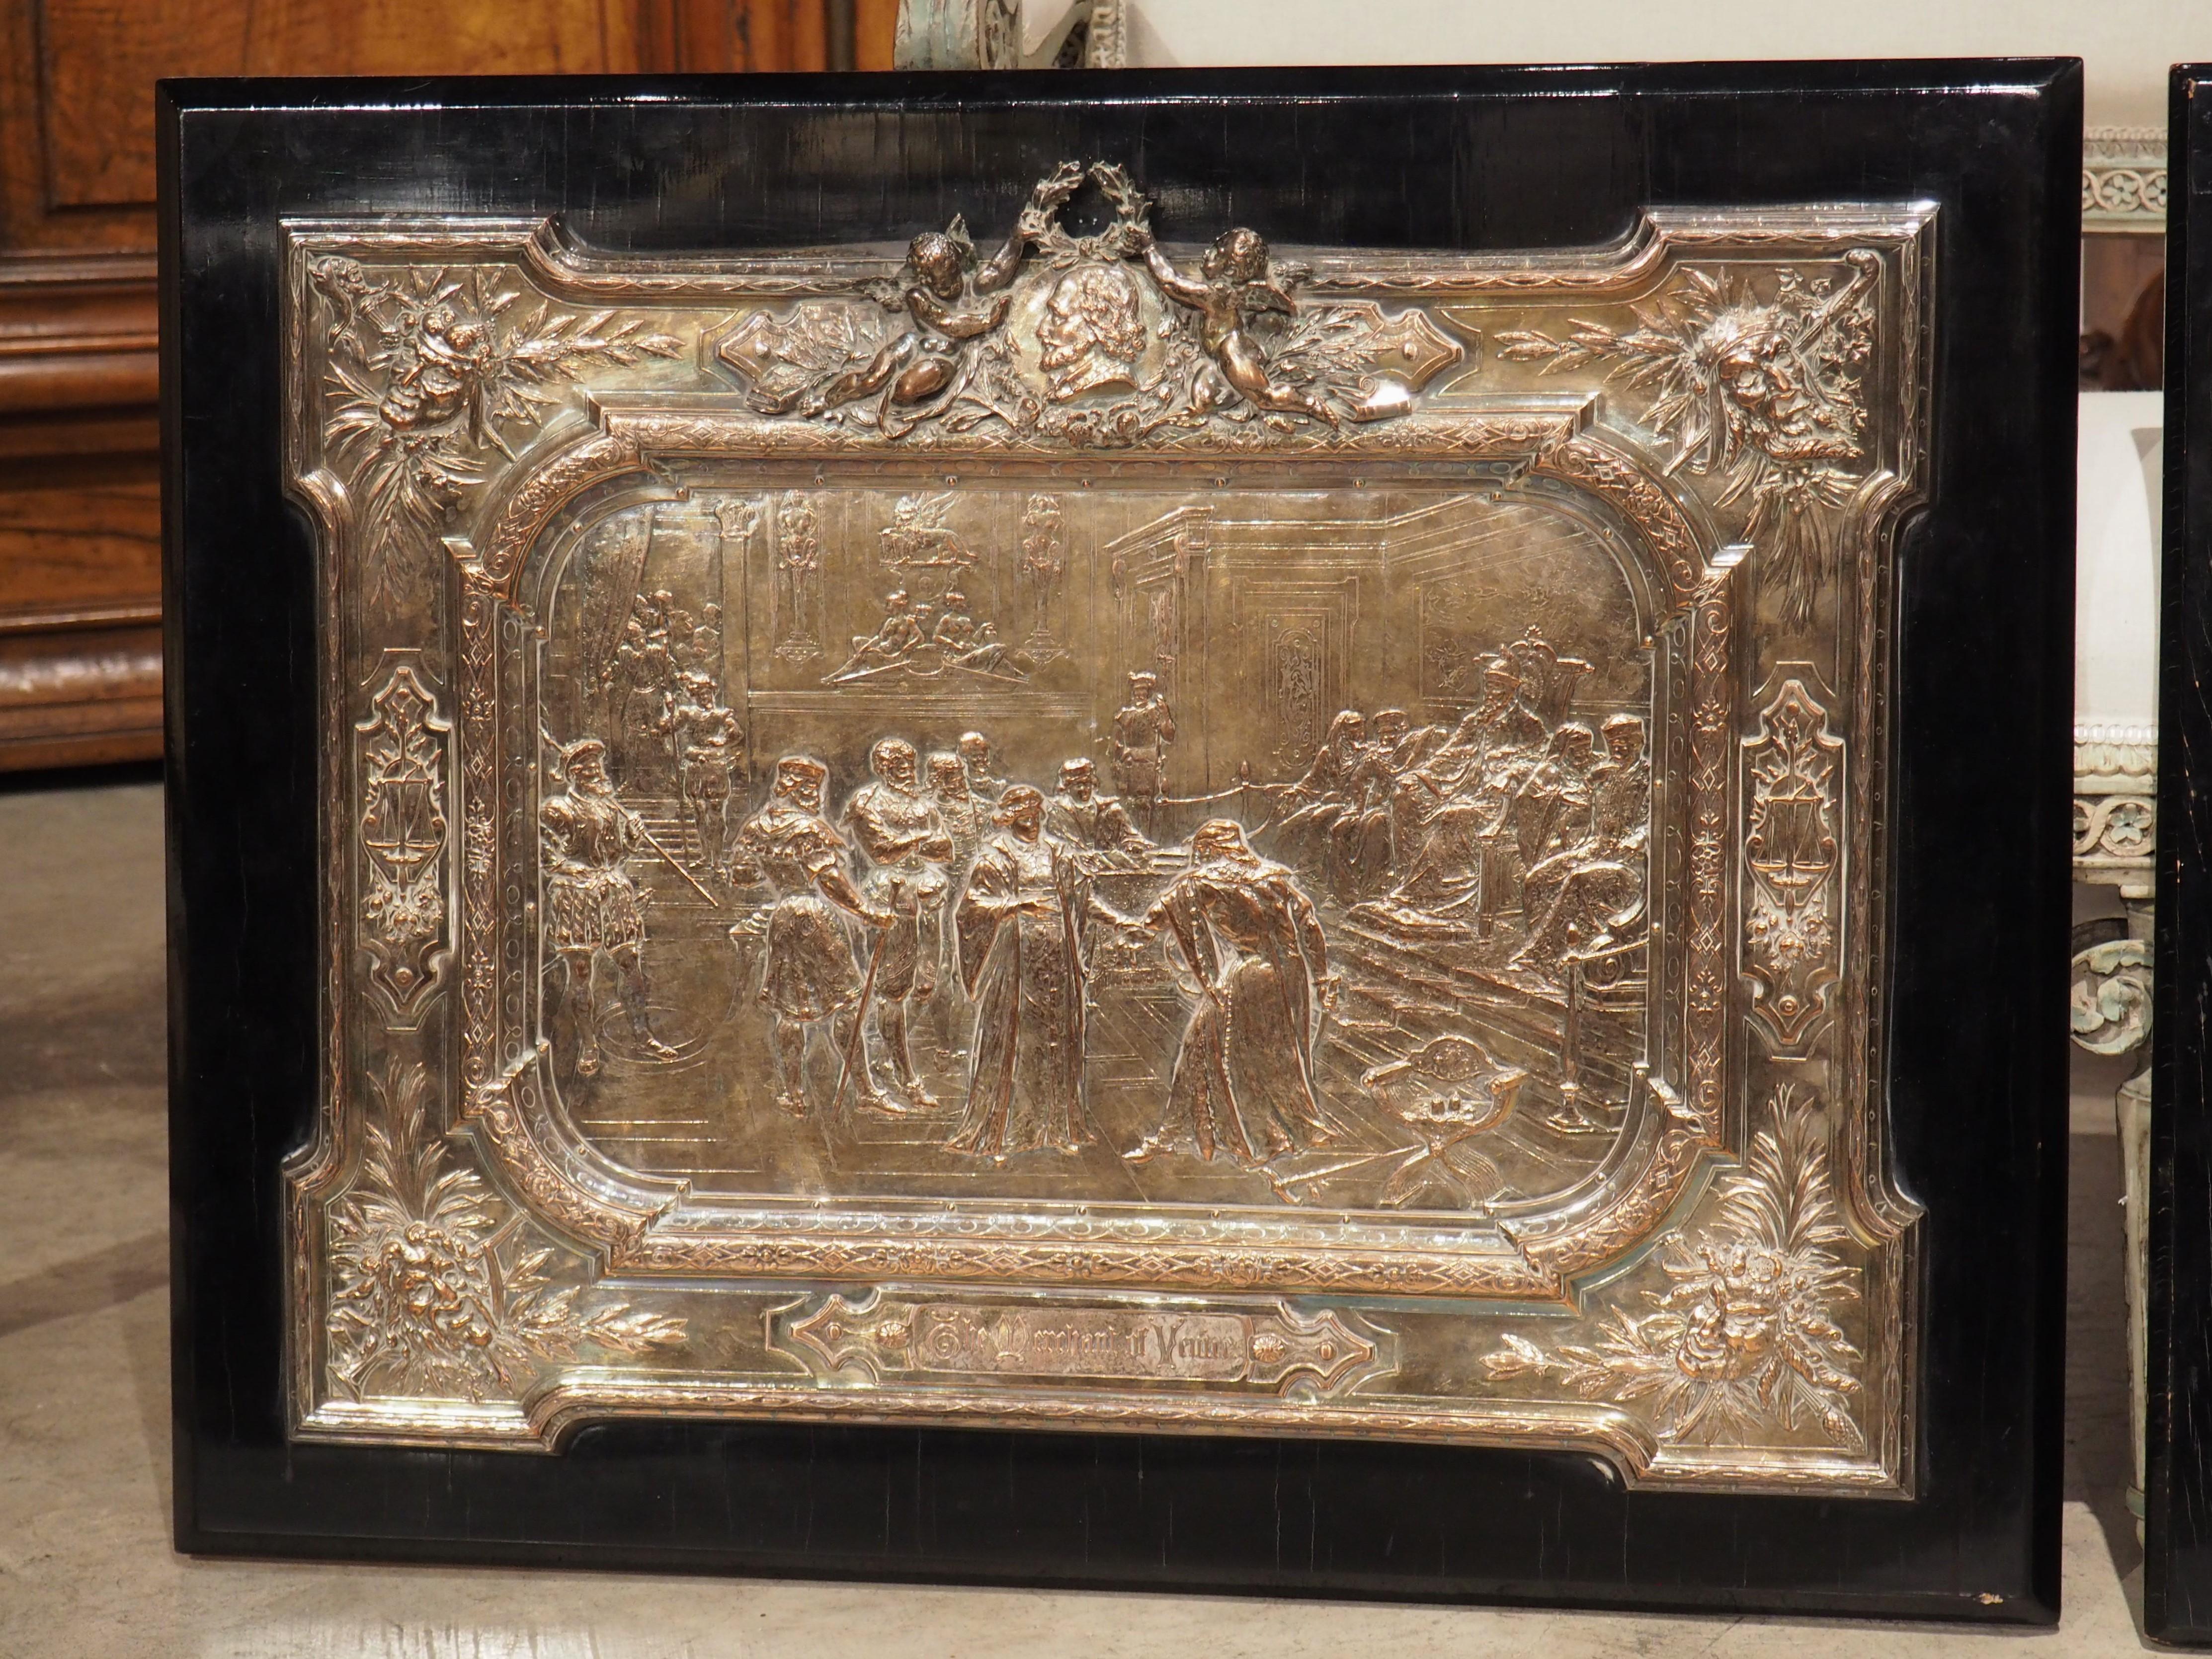 Repoussé Pair of Late 19th Century Wood Mounted Copper Reliefs of Shakespeare Scenes